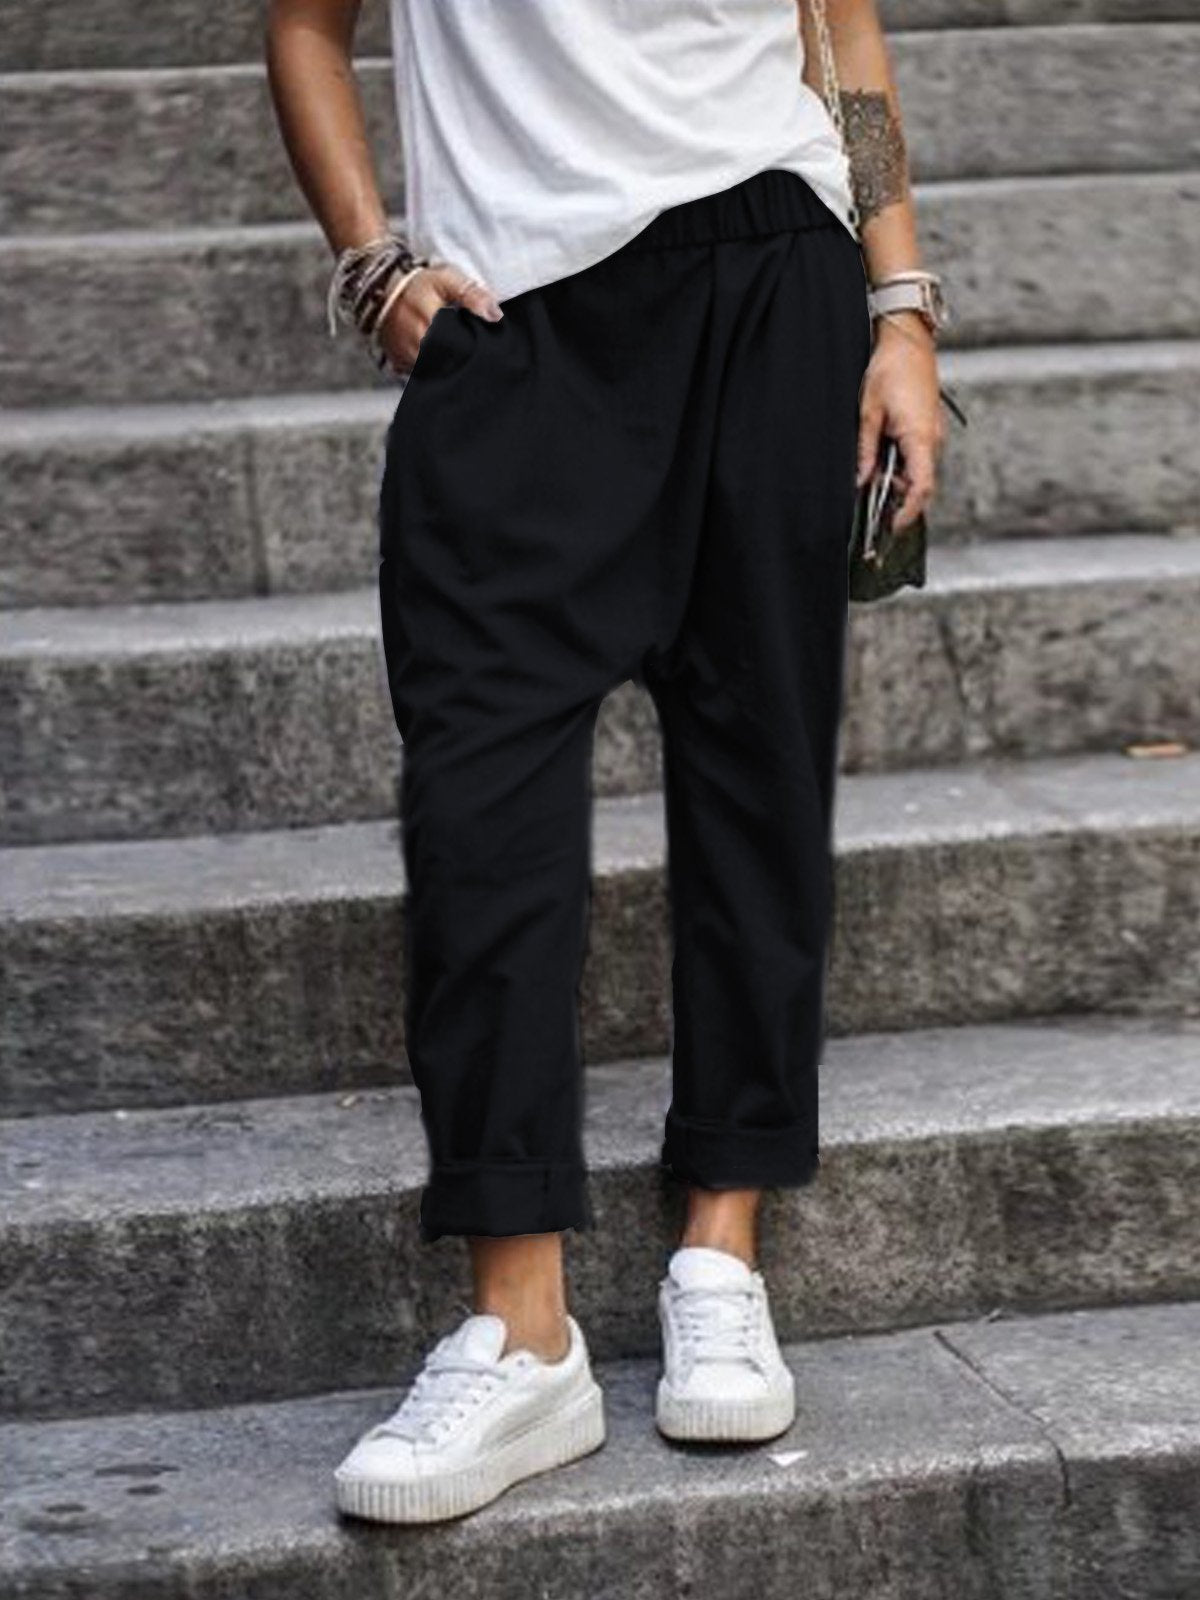 Solid Color Harem Pants Casual Elastic High Waist Trousers